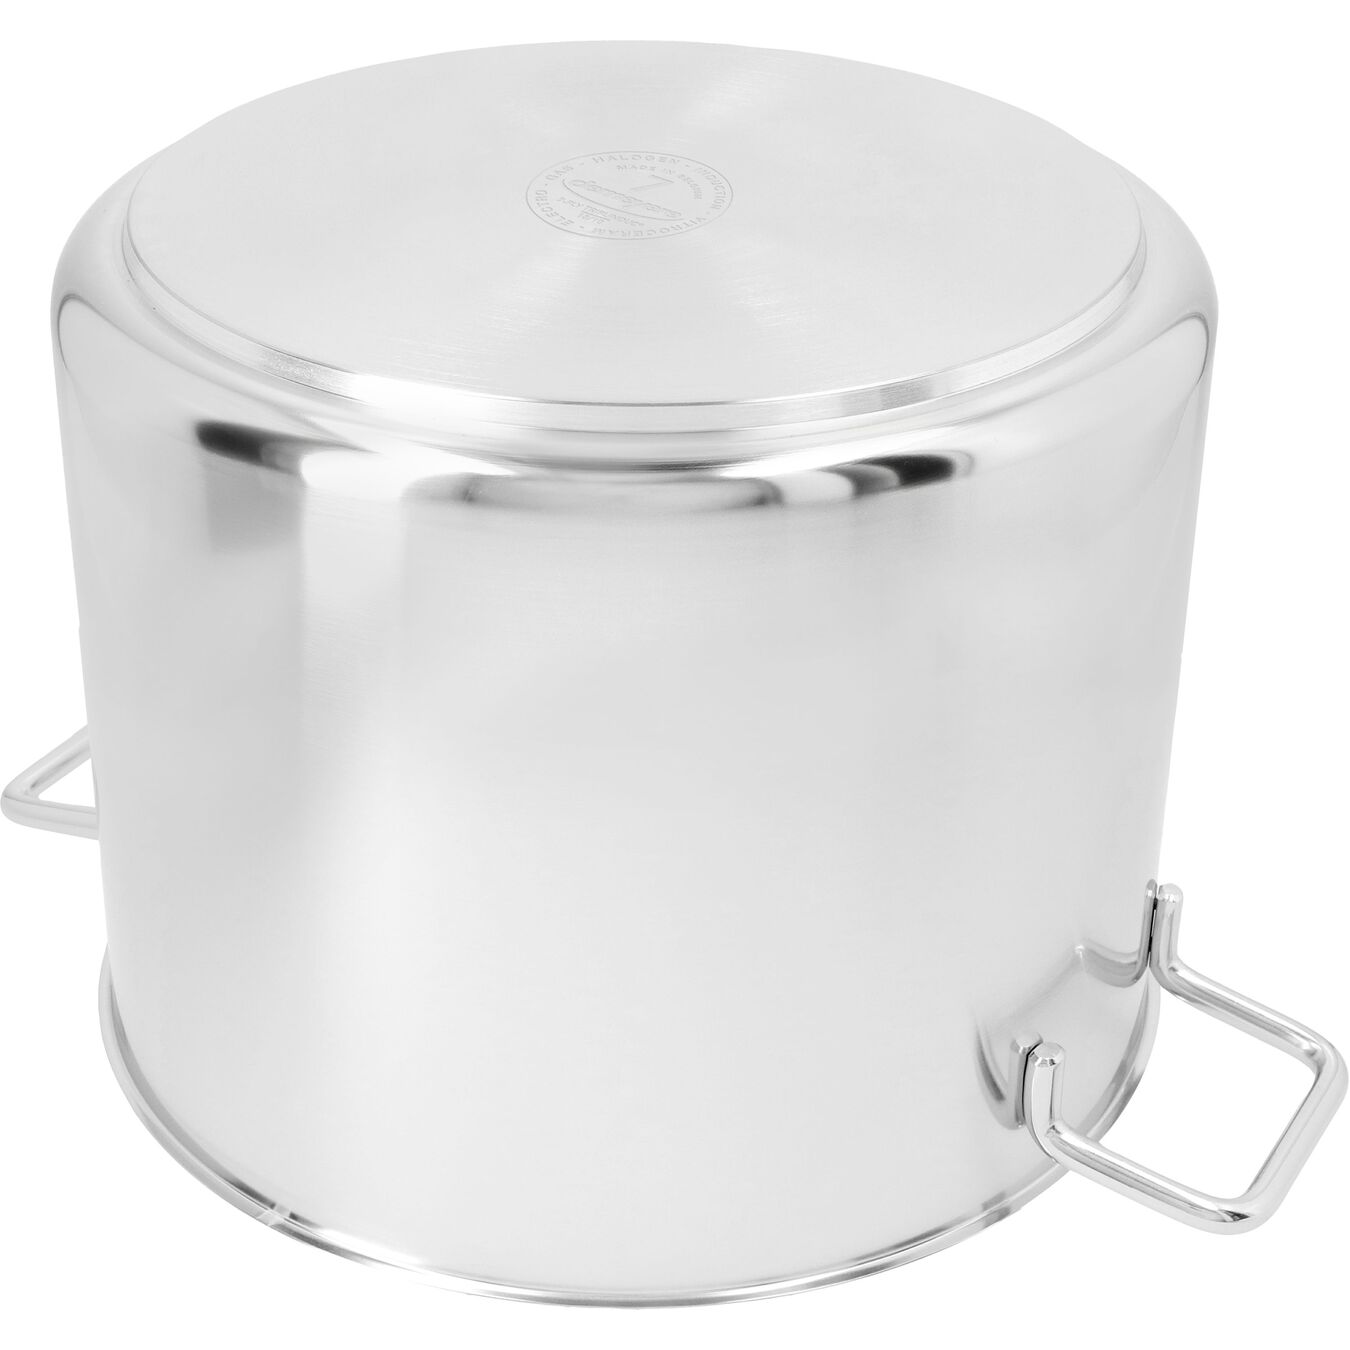 30 cm 18/10 Stainless Steel Stock pot with lid silver,,large 2